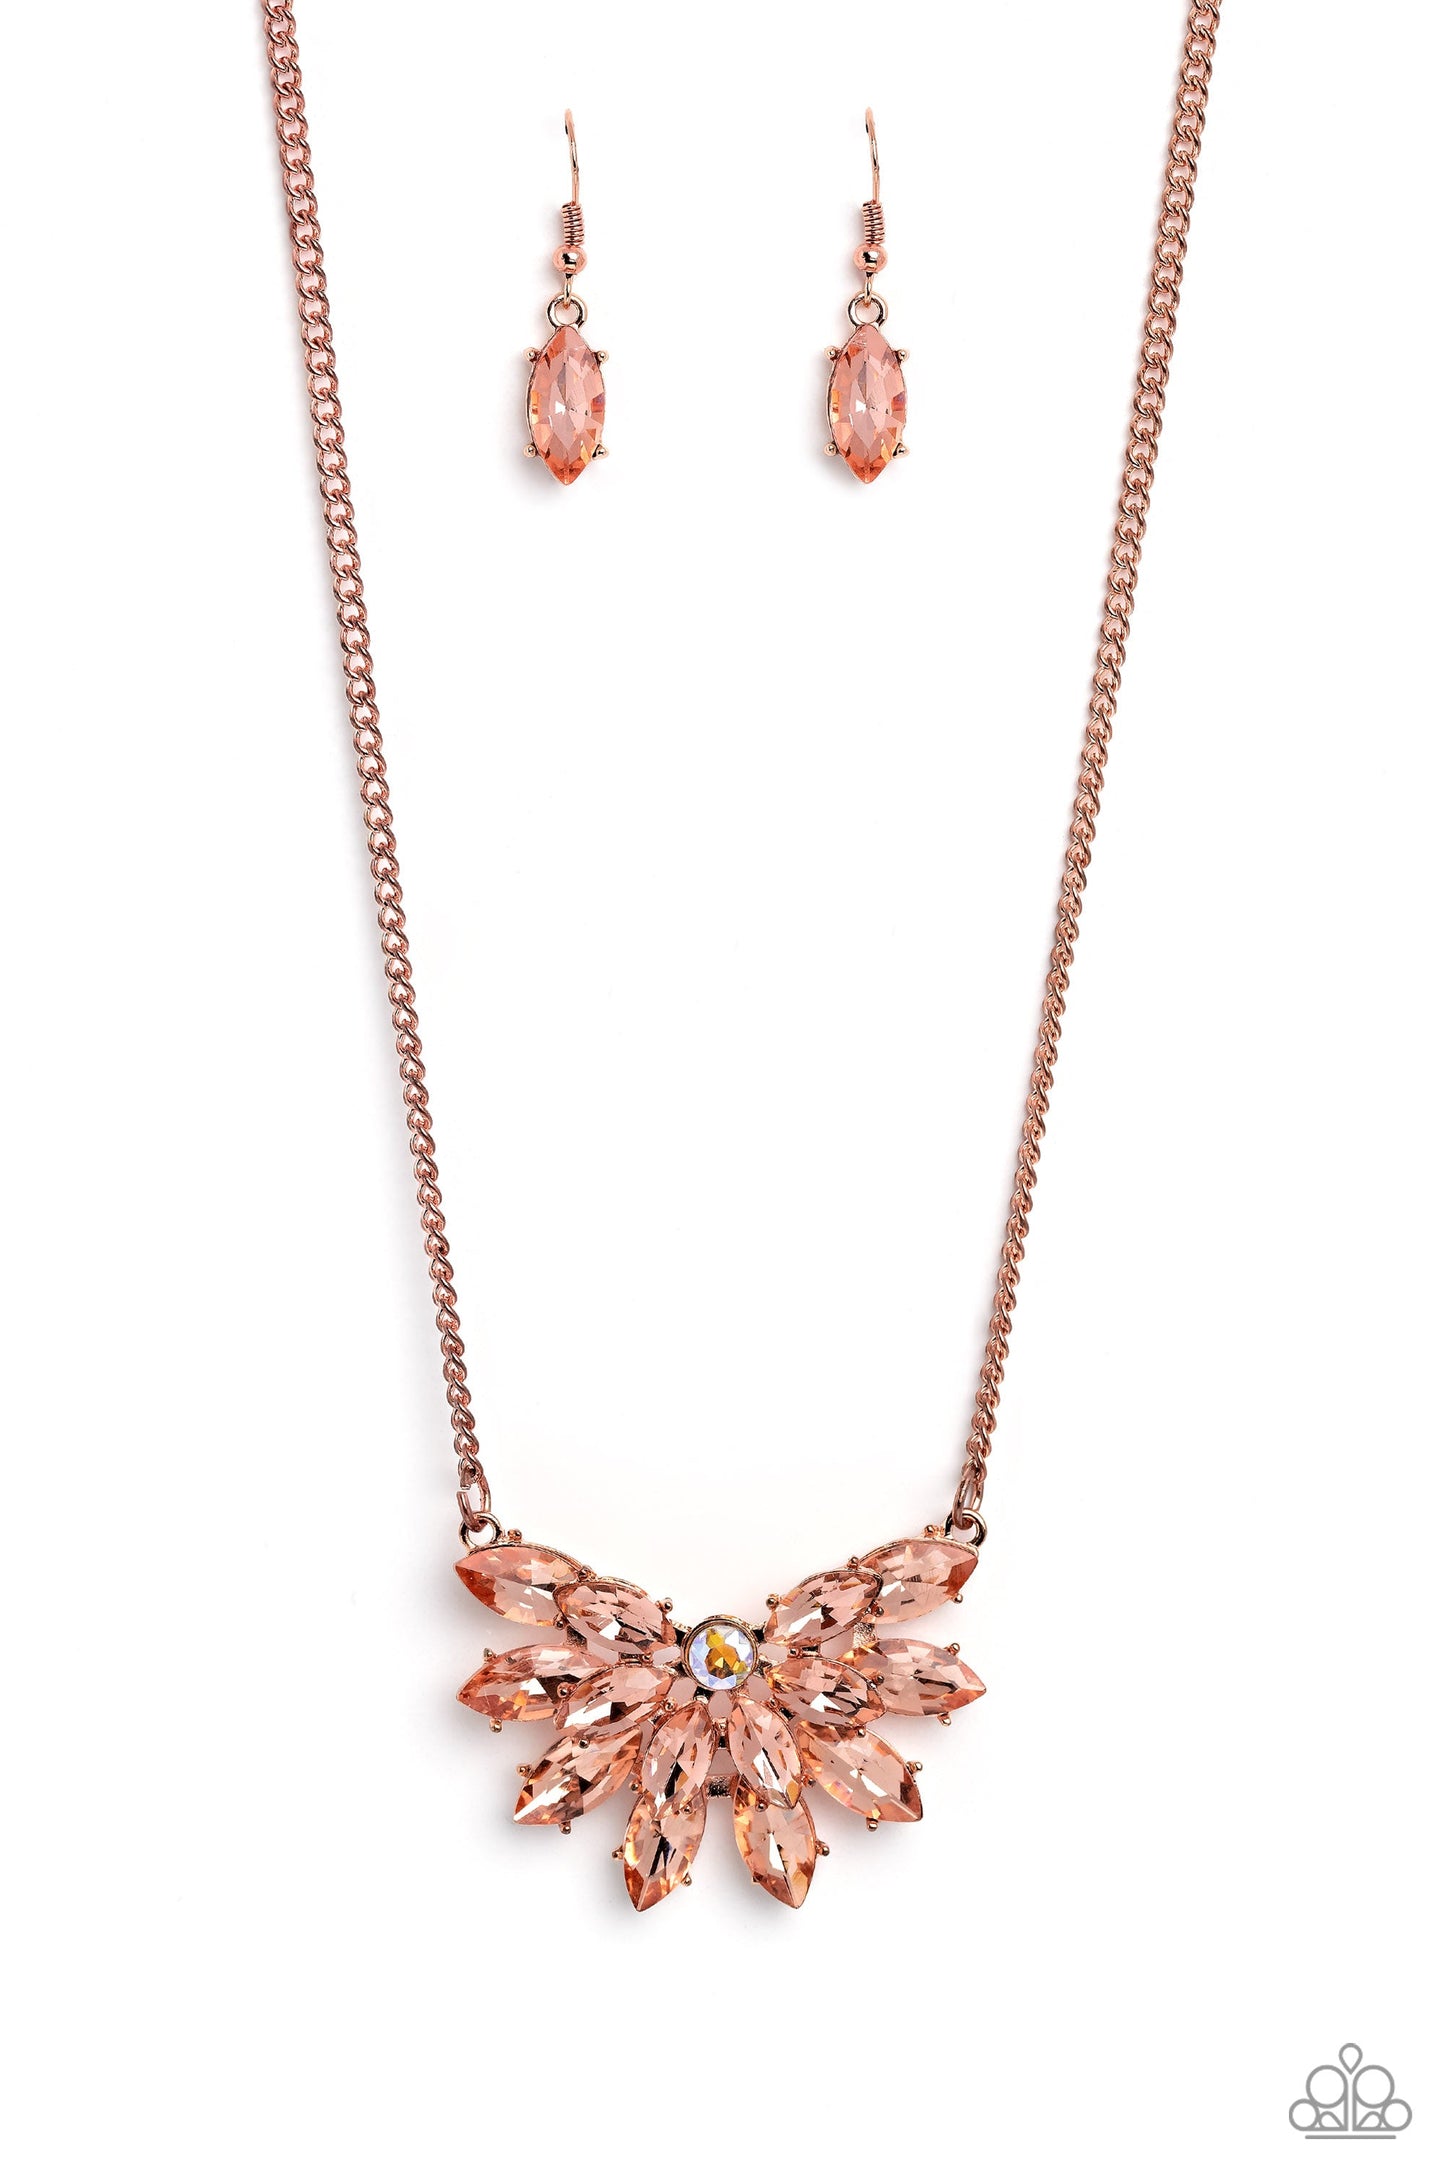 Frosted Florescence - Copper Marquise-Cut Rhinestones/Iridescent Rhinestone Pendant Paparazzi Necklace & matching earrings